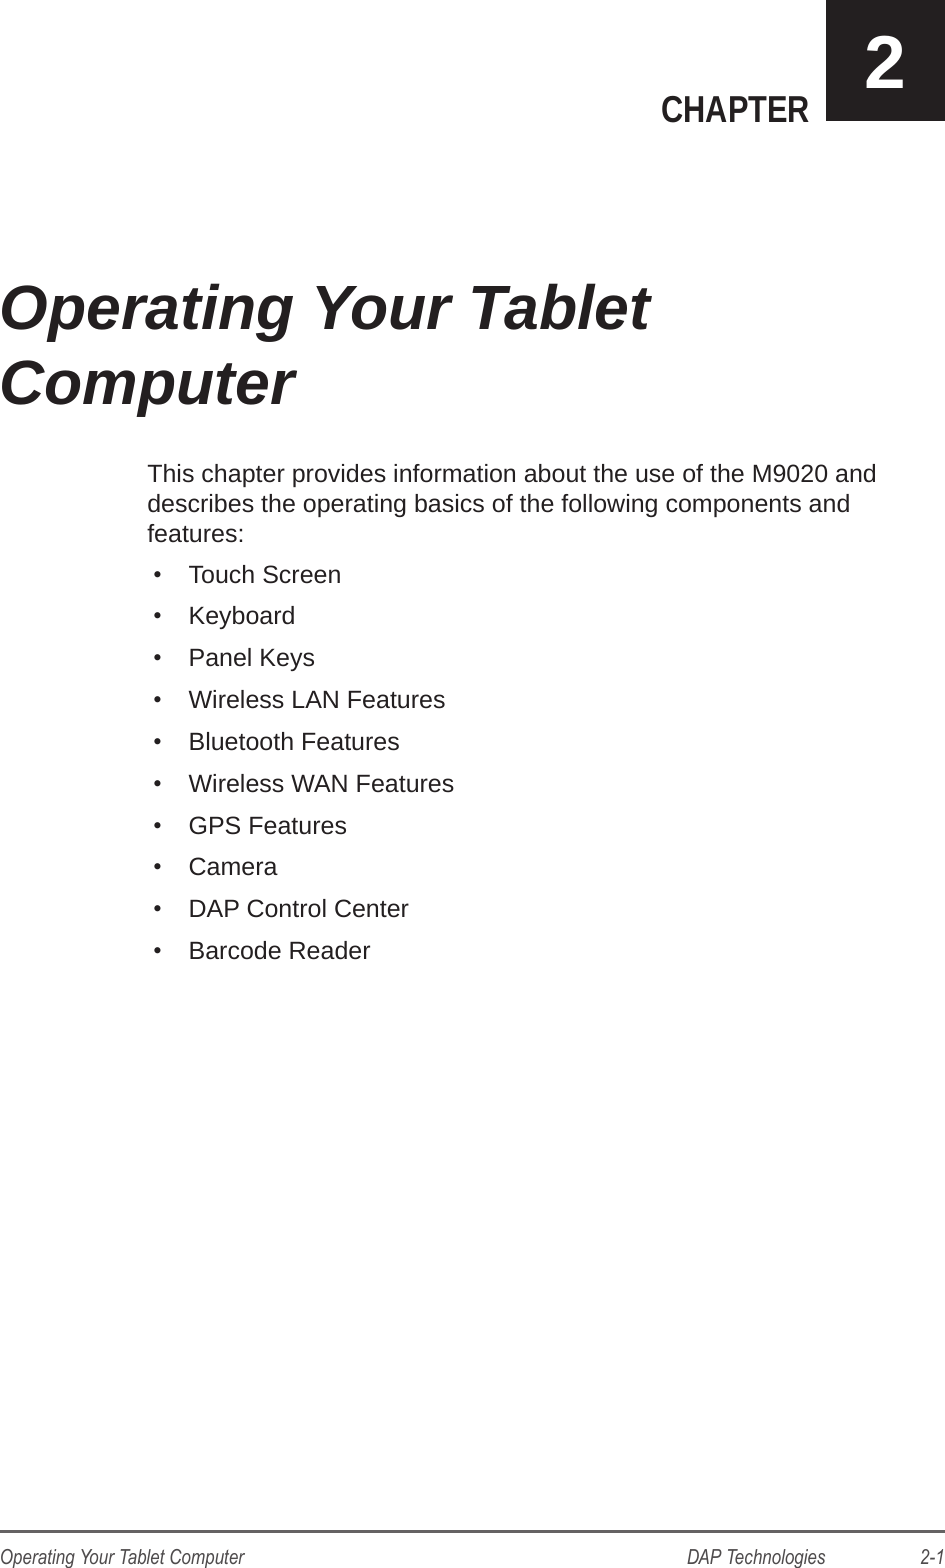 DAP Technologies                    2-1Operating Your Tablet ComputerCHAPTER 2This chapter provides information about the use of the M9020 and describes the operating basics of the following components and features:•  Touch Screen•  Keyboard•  Panel Keys•  Wireless LAN Features•  Bluetooth Features•  Wireless WAN Features•  GPS Features•  Camera•  DAP Control Center•  Barcode ReaderOperating Your Tablet  Computer